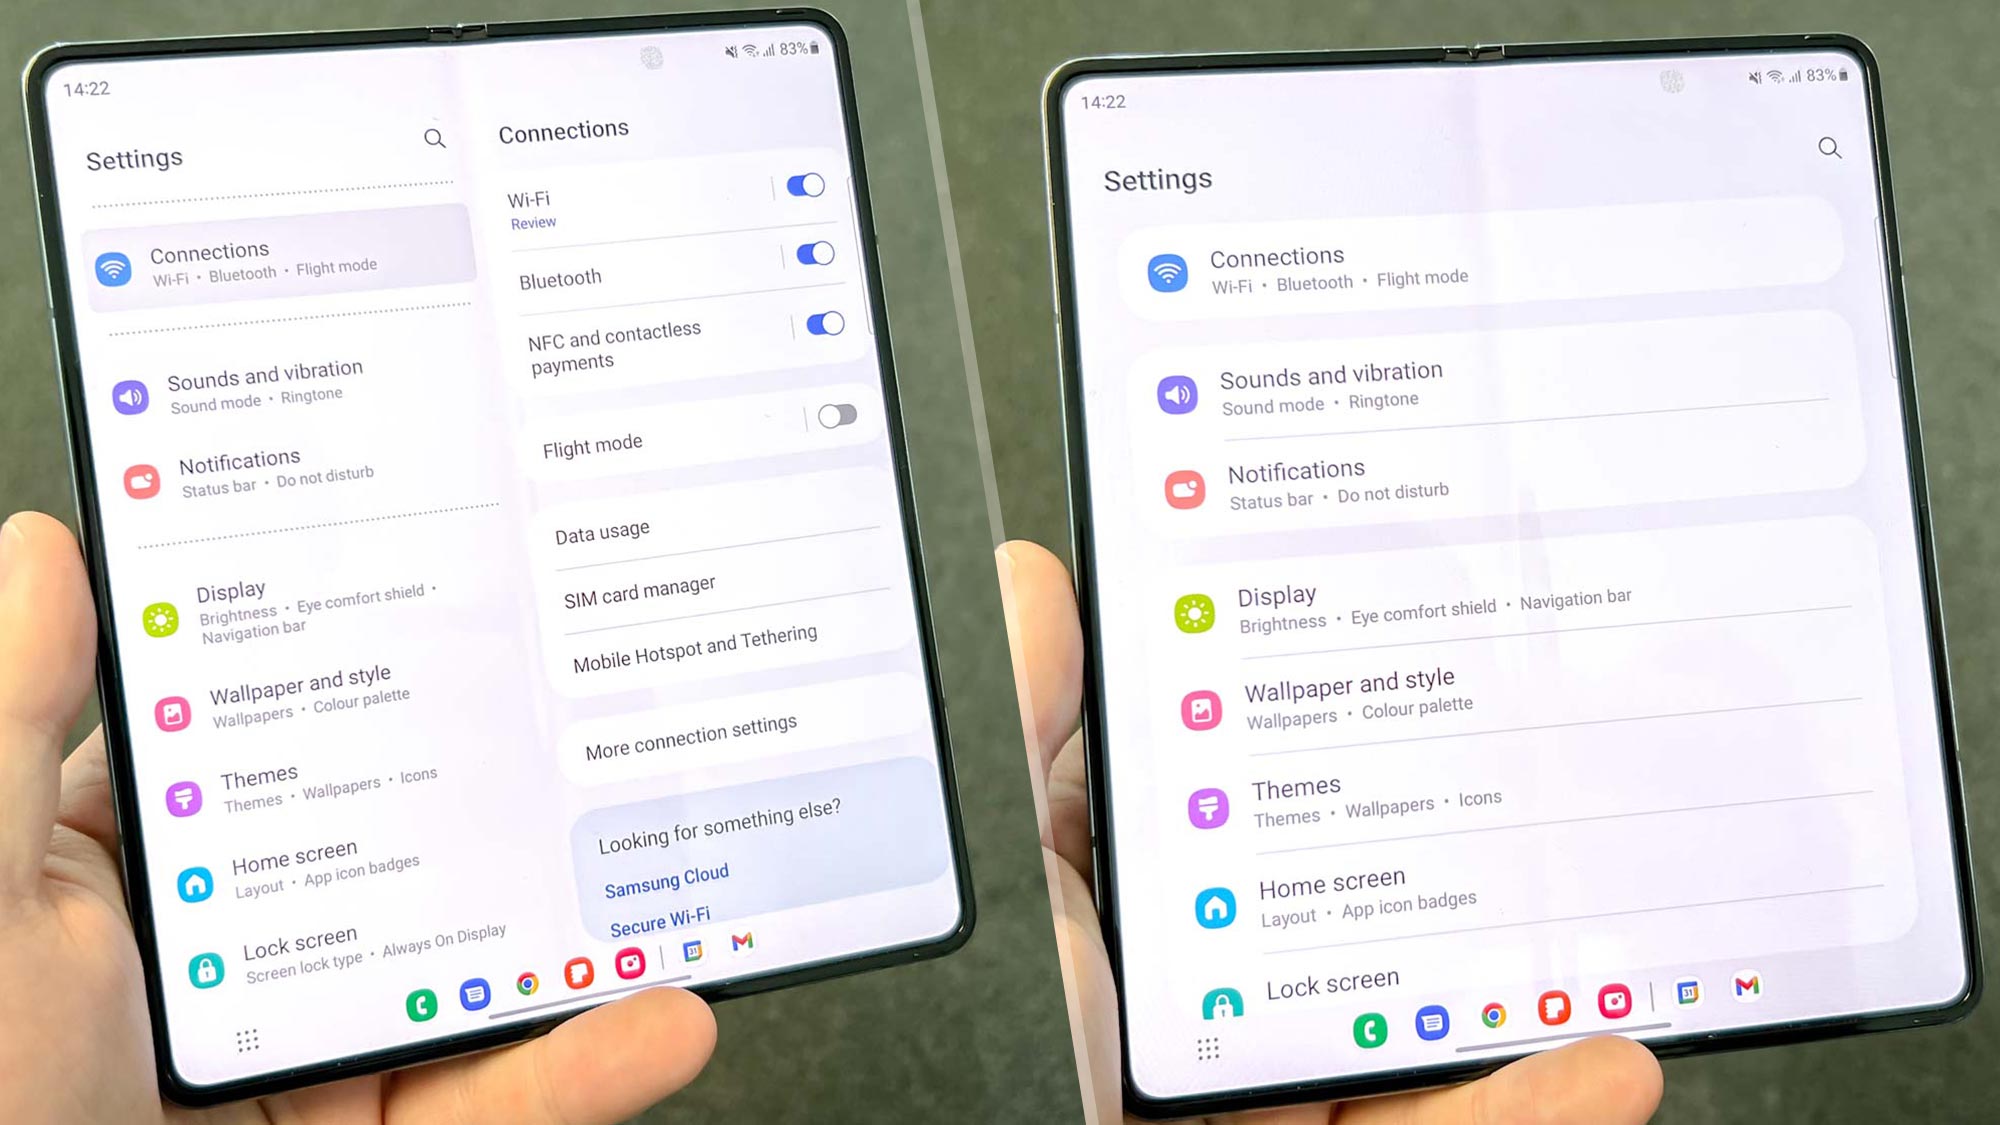 Samsung Galaxy Z Fold 4 uses Settings app in both single view and multi view modes